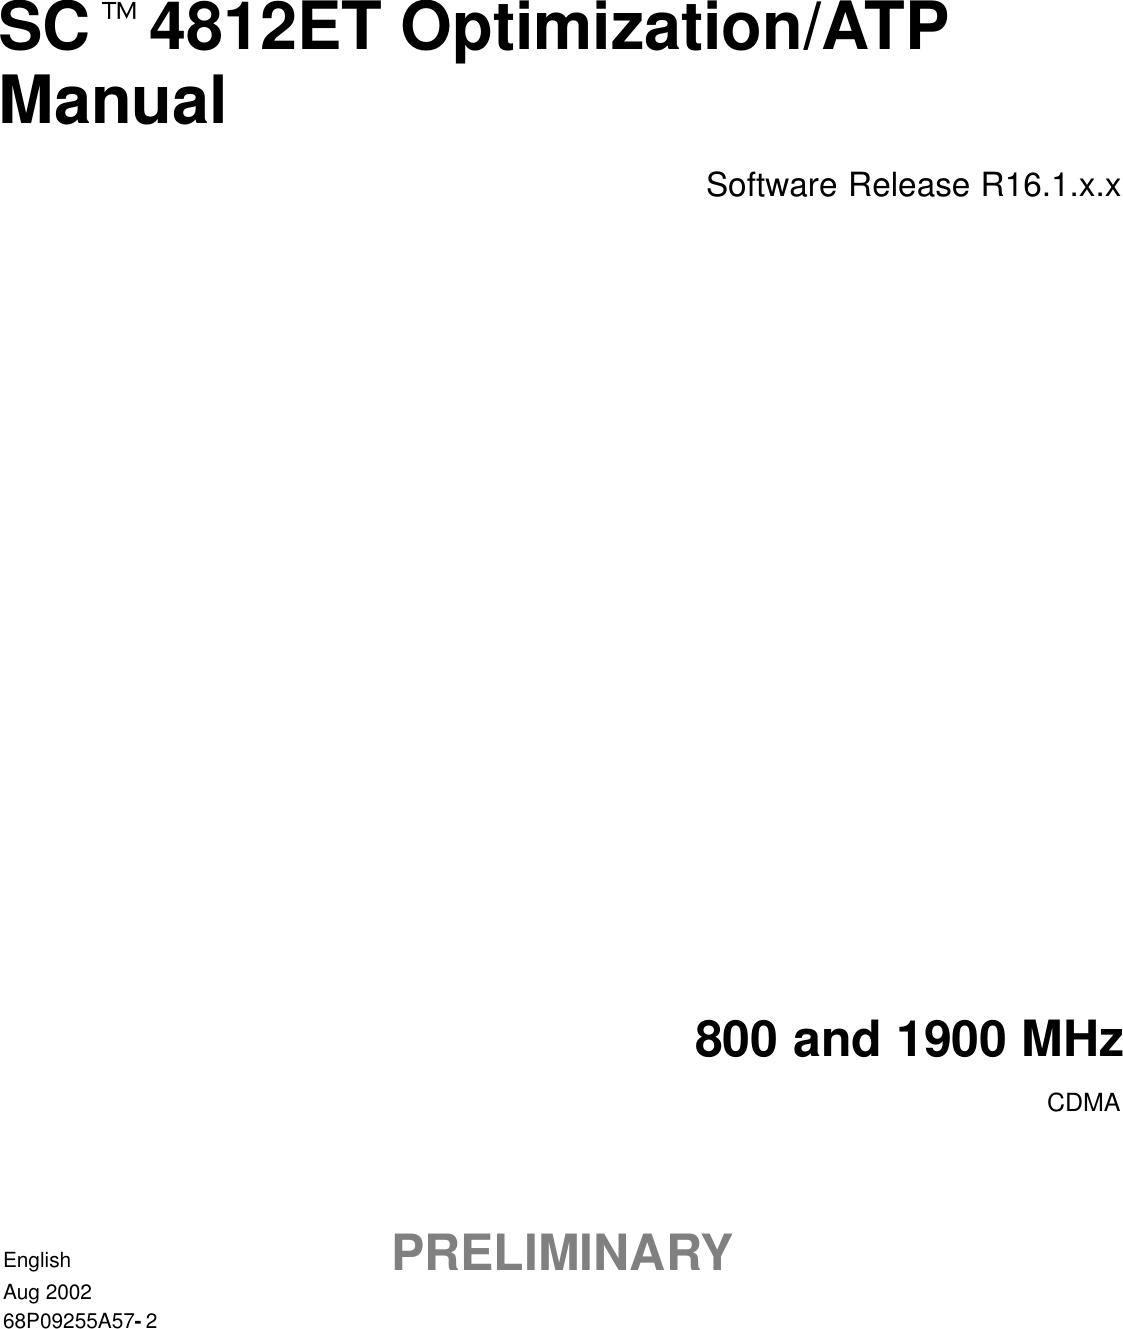 SCt4812ET Optimization/ATPManualSoftware Release R16.1.x.x800 and 1900 MHzCDMAEnglishAug 200268P09255A57-2PRELIMINARY